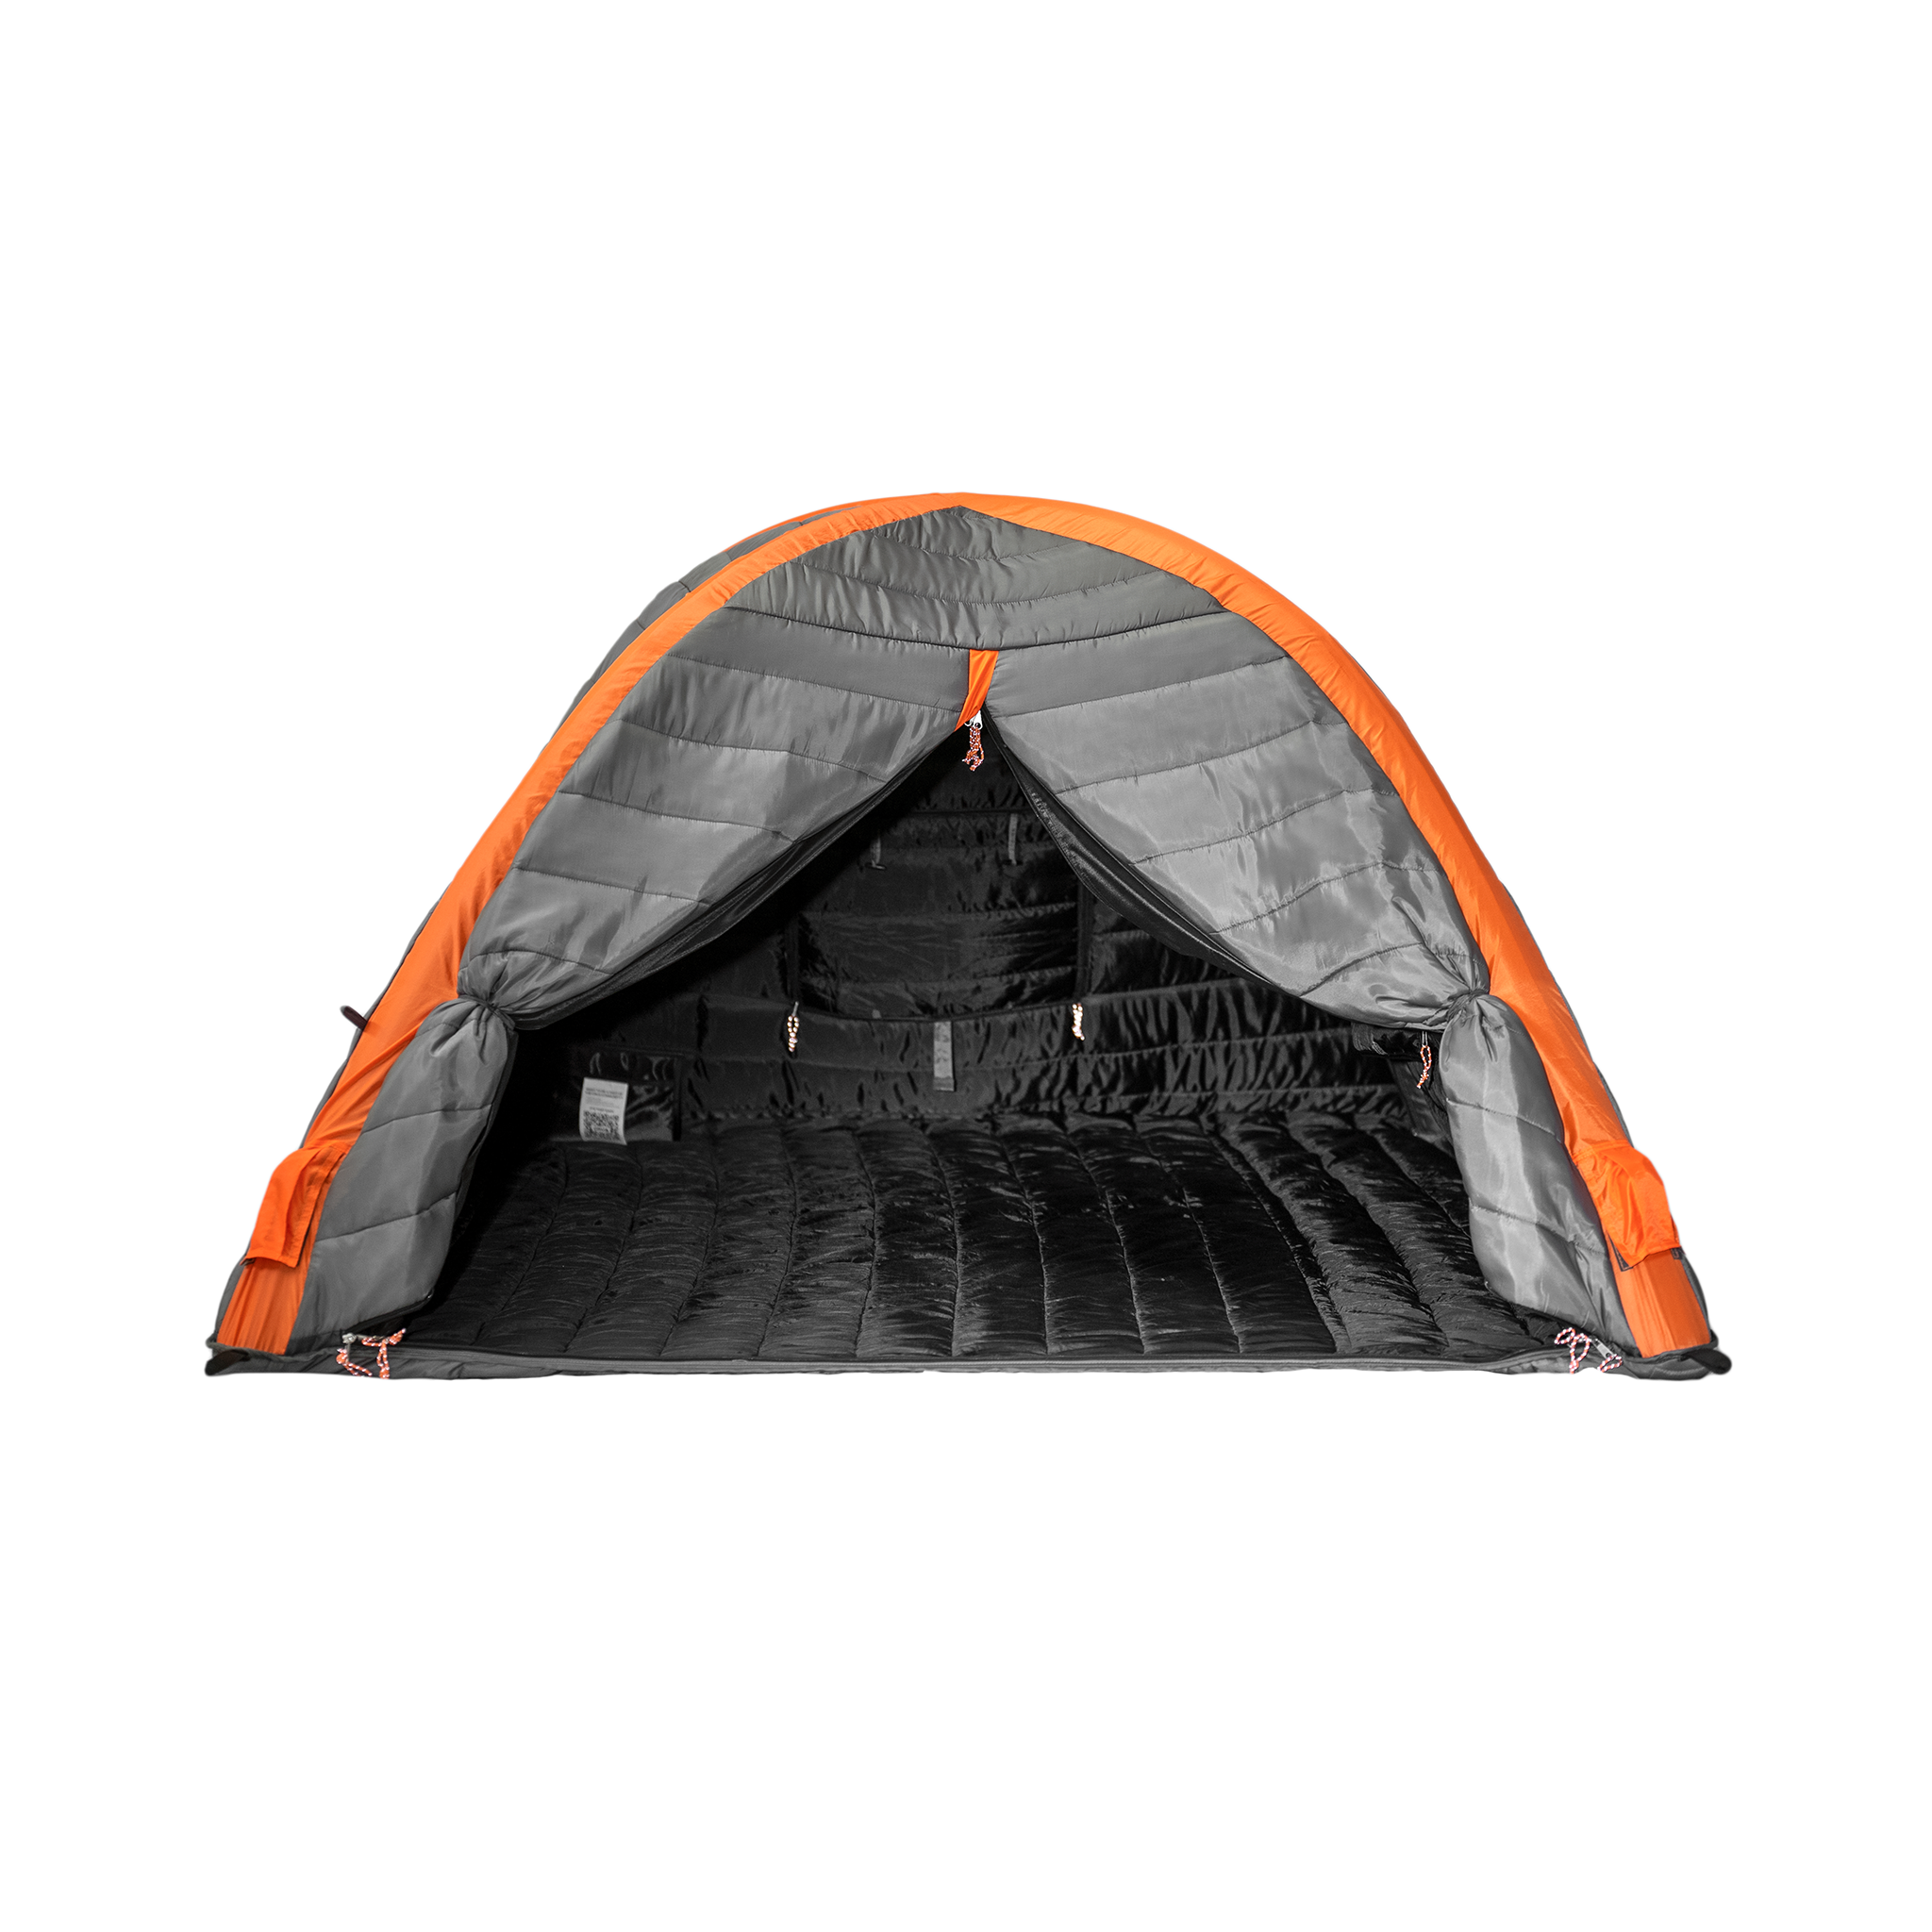 Culla Maxx | 3 Person Insulated Inner Tent With Temperature Regulating, Noise Dampening And Light Blocking Features